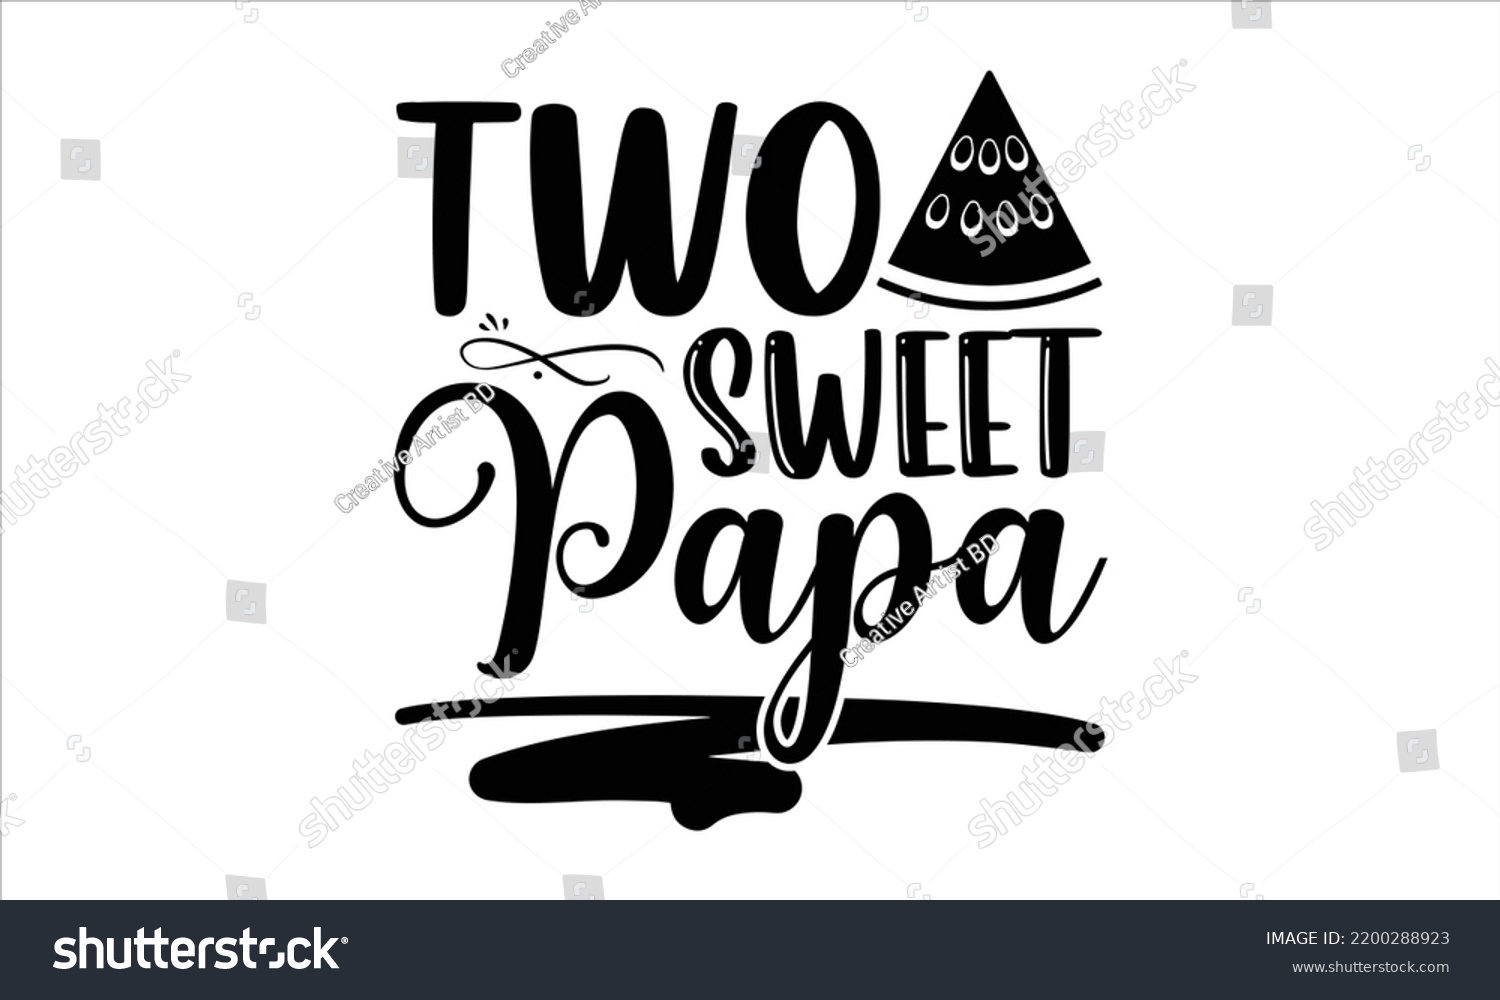 SVG of Two Sweet Papa - Watermelon T shirt Design, Modern calligraphy, Cut Files for Cricut Svg, Illustration for prints on bags, posters svg